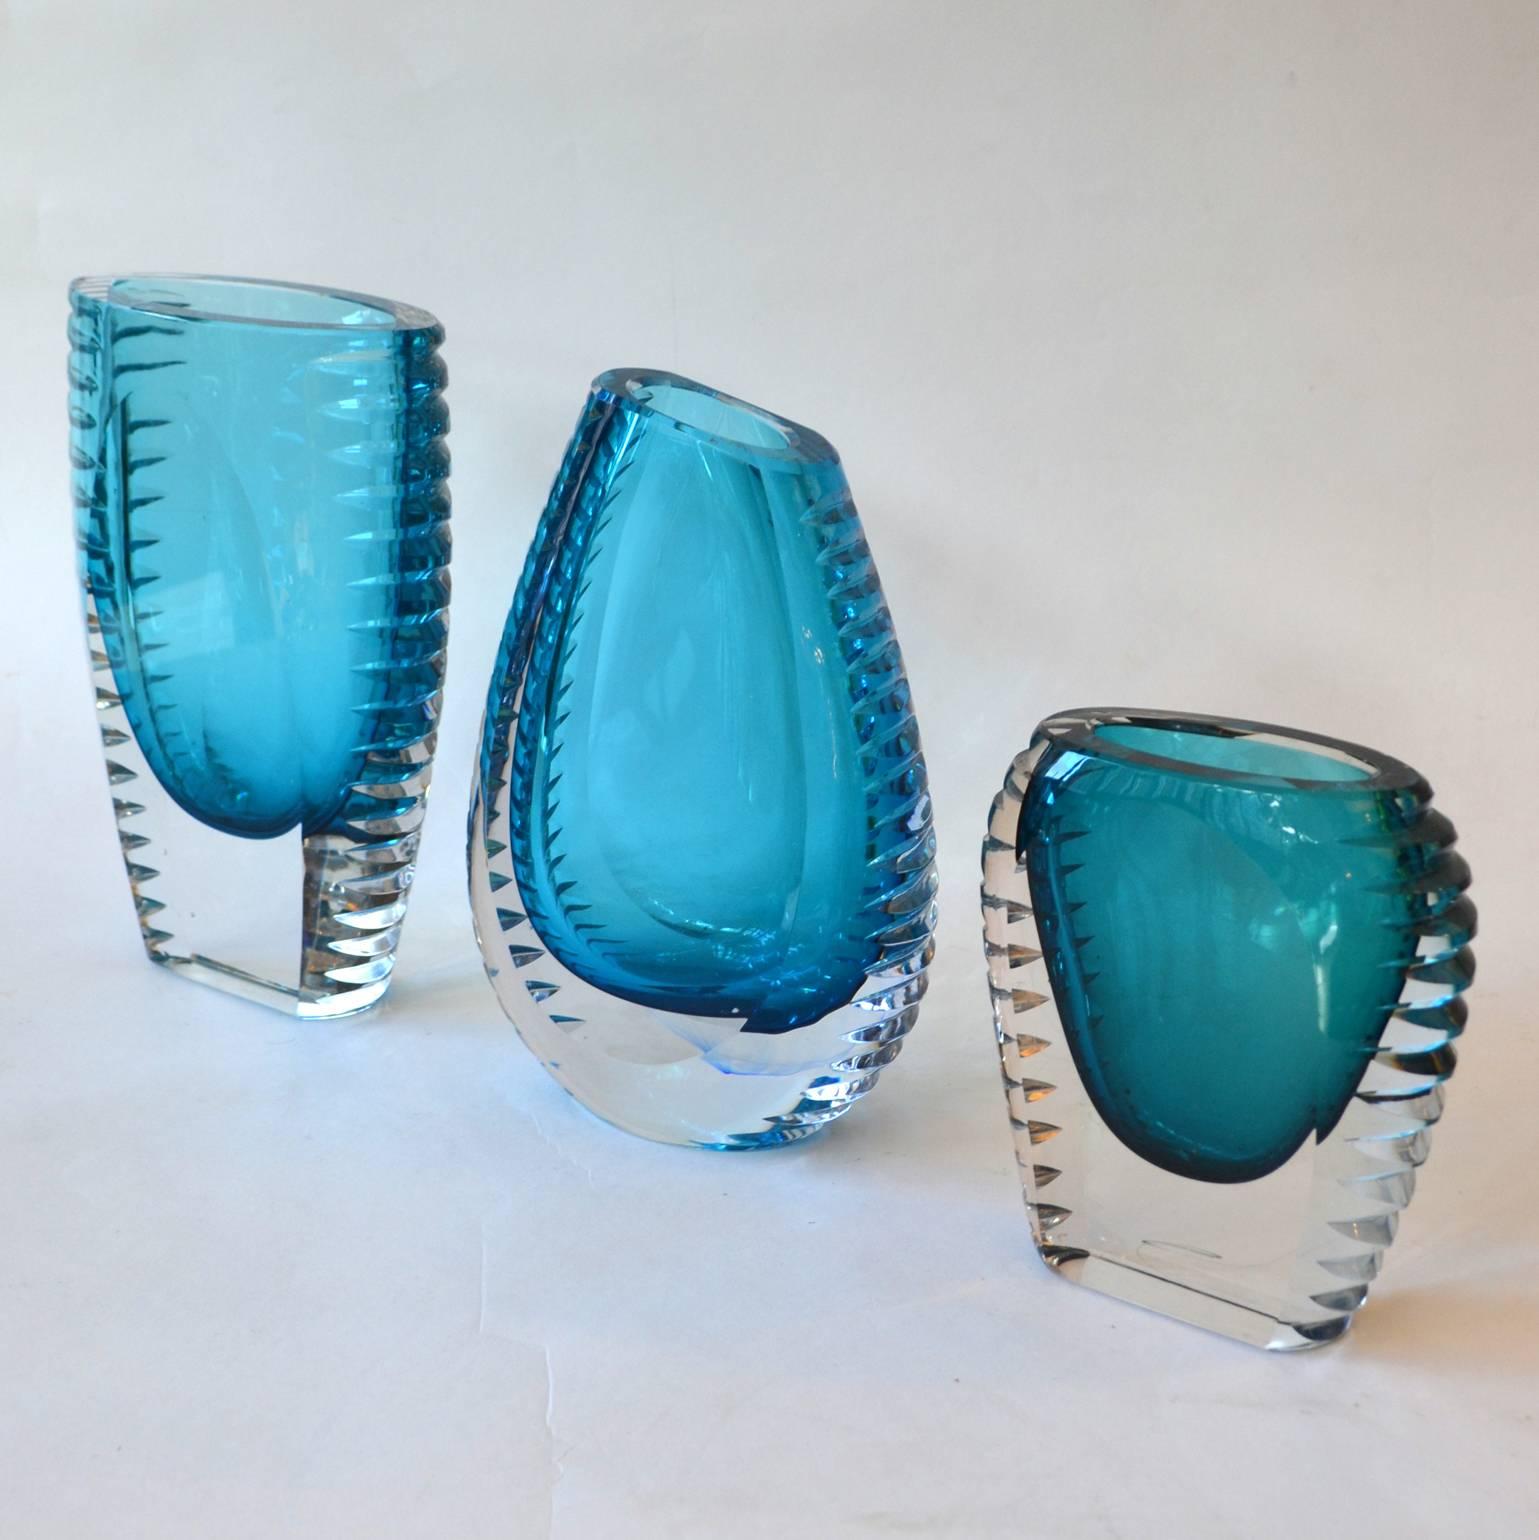 Three vibrant sky blue handblown and cut vases in lead crystal by Beyer & Co. Facet cut-glass vases with flat belly's and serrated edges show excellent craftsmanship.